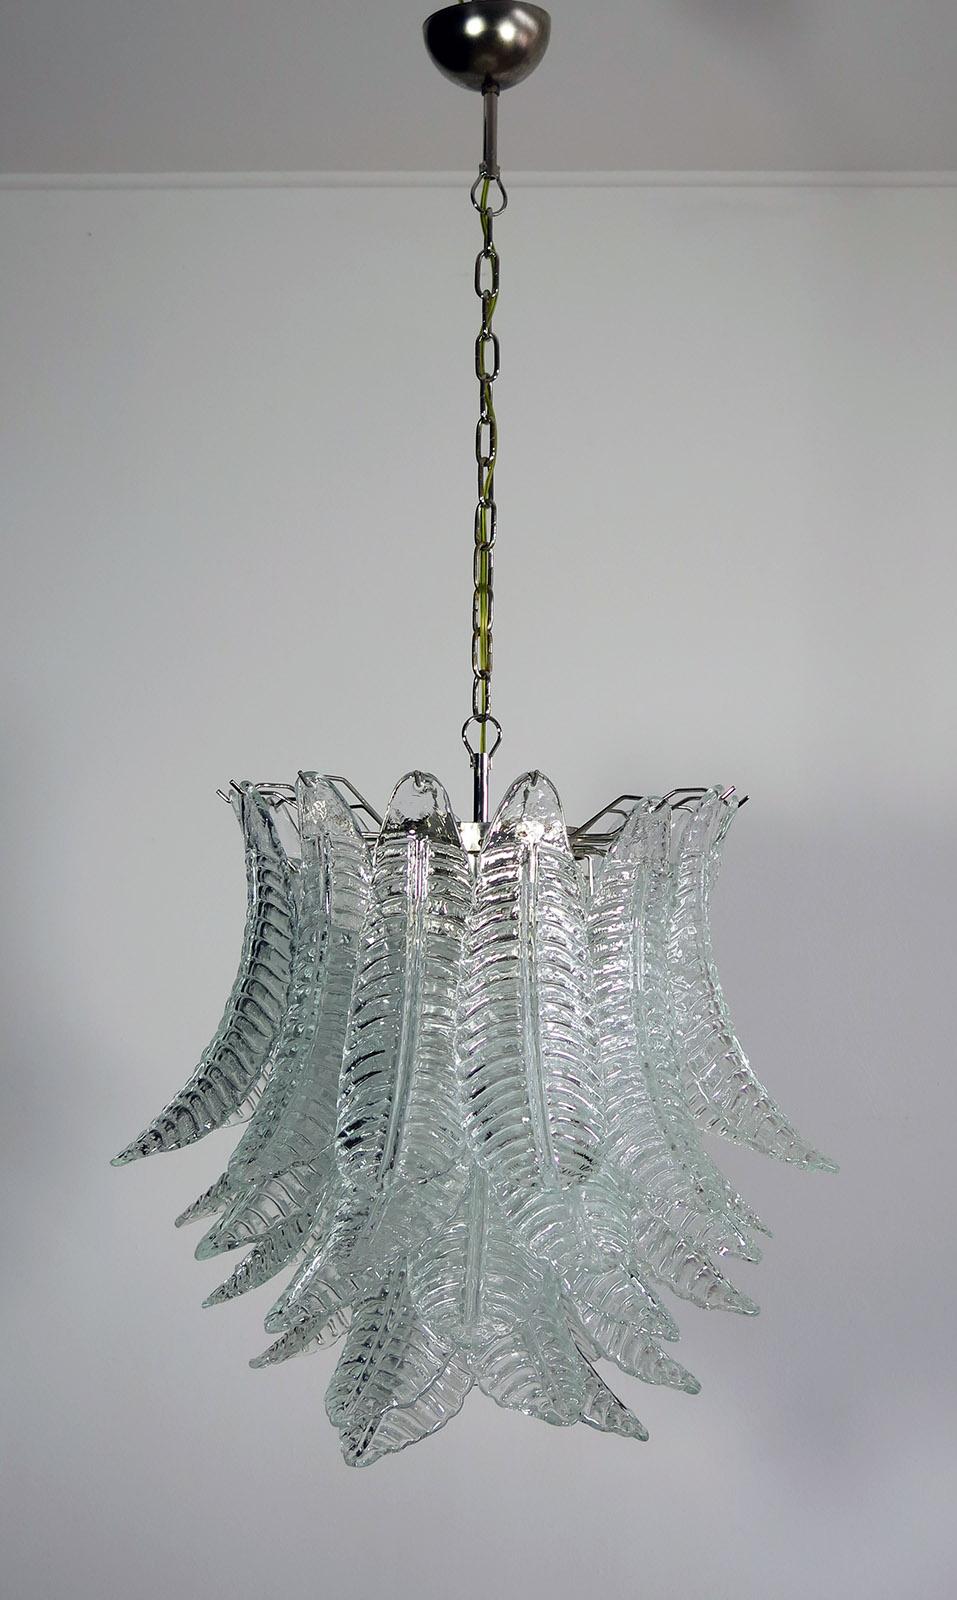 Beautiful and huge Italian Murano Chandelier composed of 41 splendid trasparent glasses that give a very elegant look. The glasses of this chandelier are real works of art.
Period: late XX century
Dimensions: 51,20 inches (130 cm) height with chain;